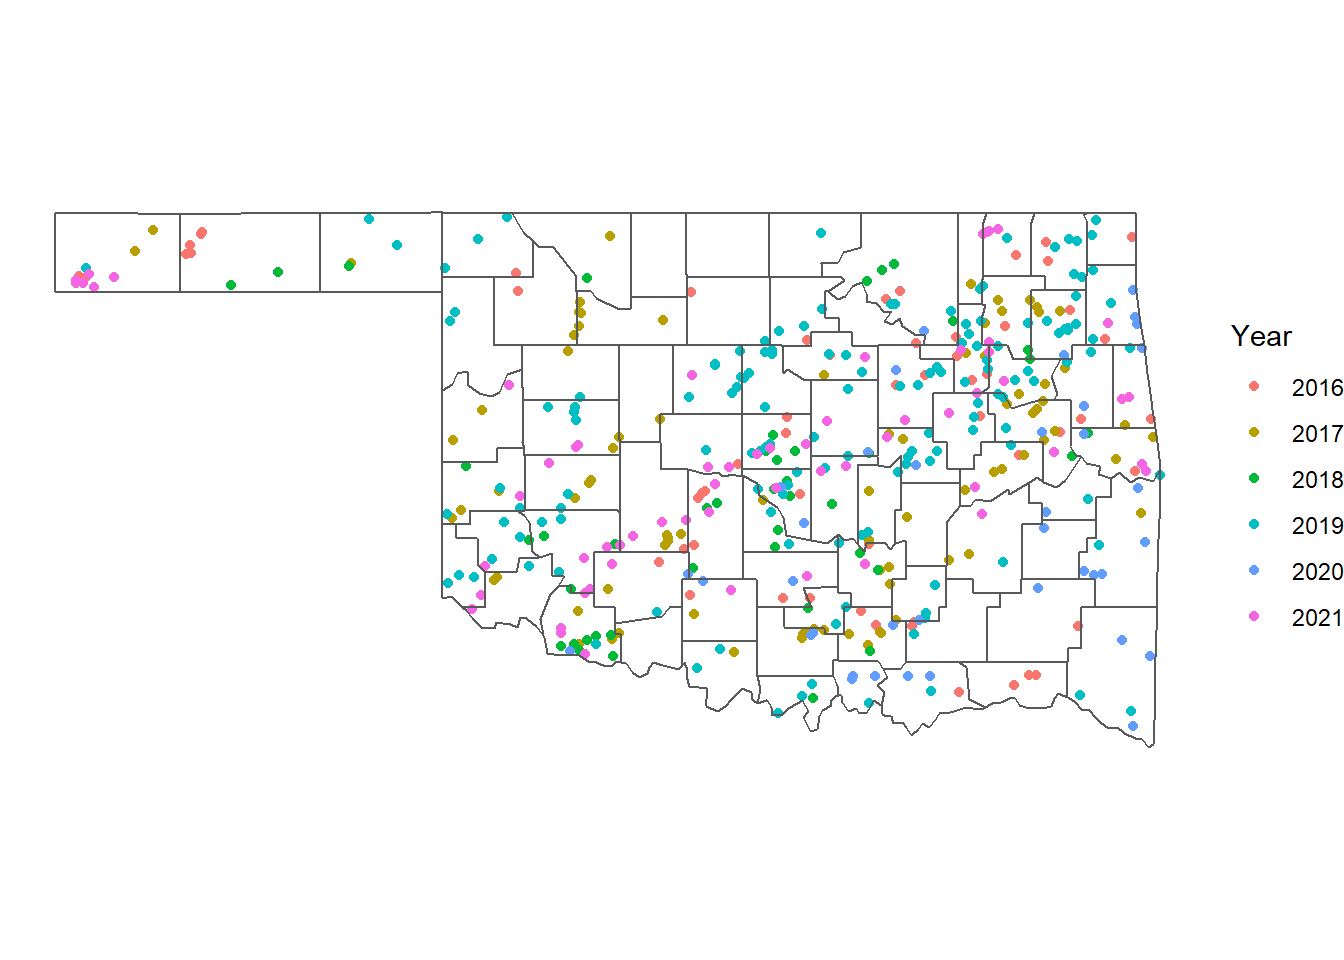 Initiation points of tornadoes in Oklahoma from 2016-2021 with years represented by the color aesthetic.